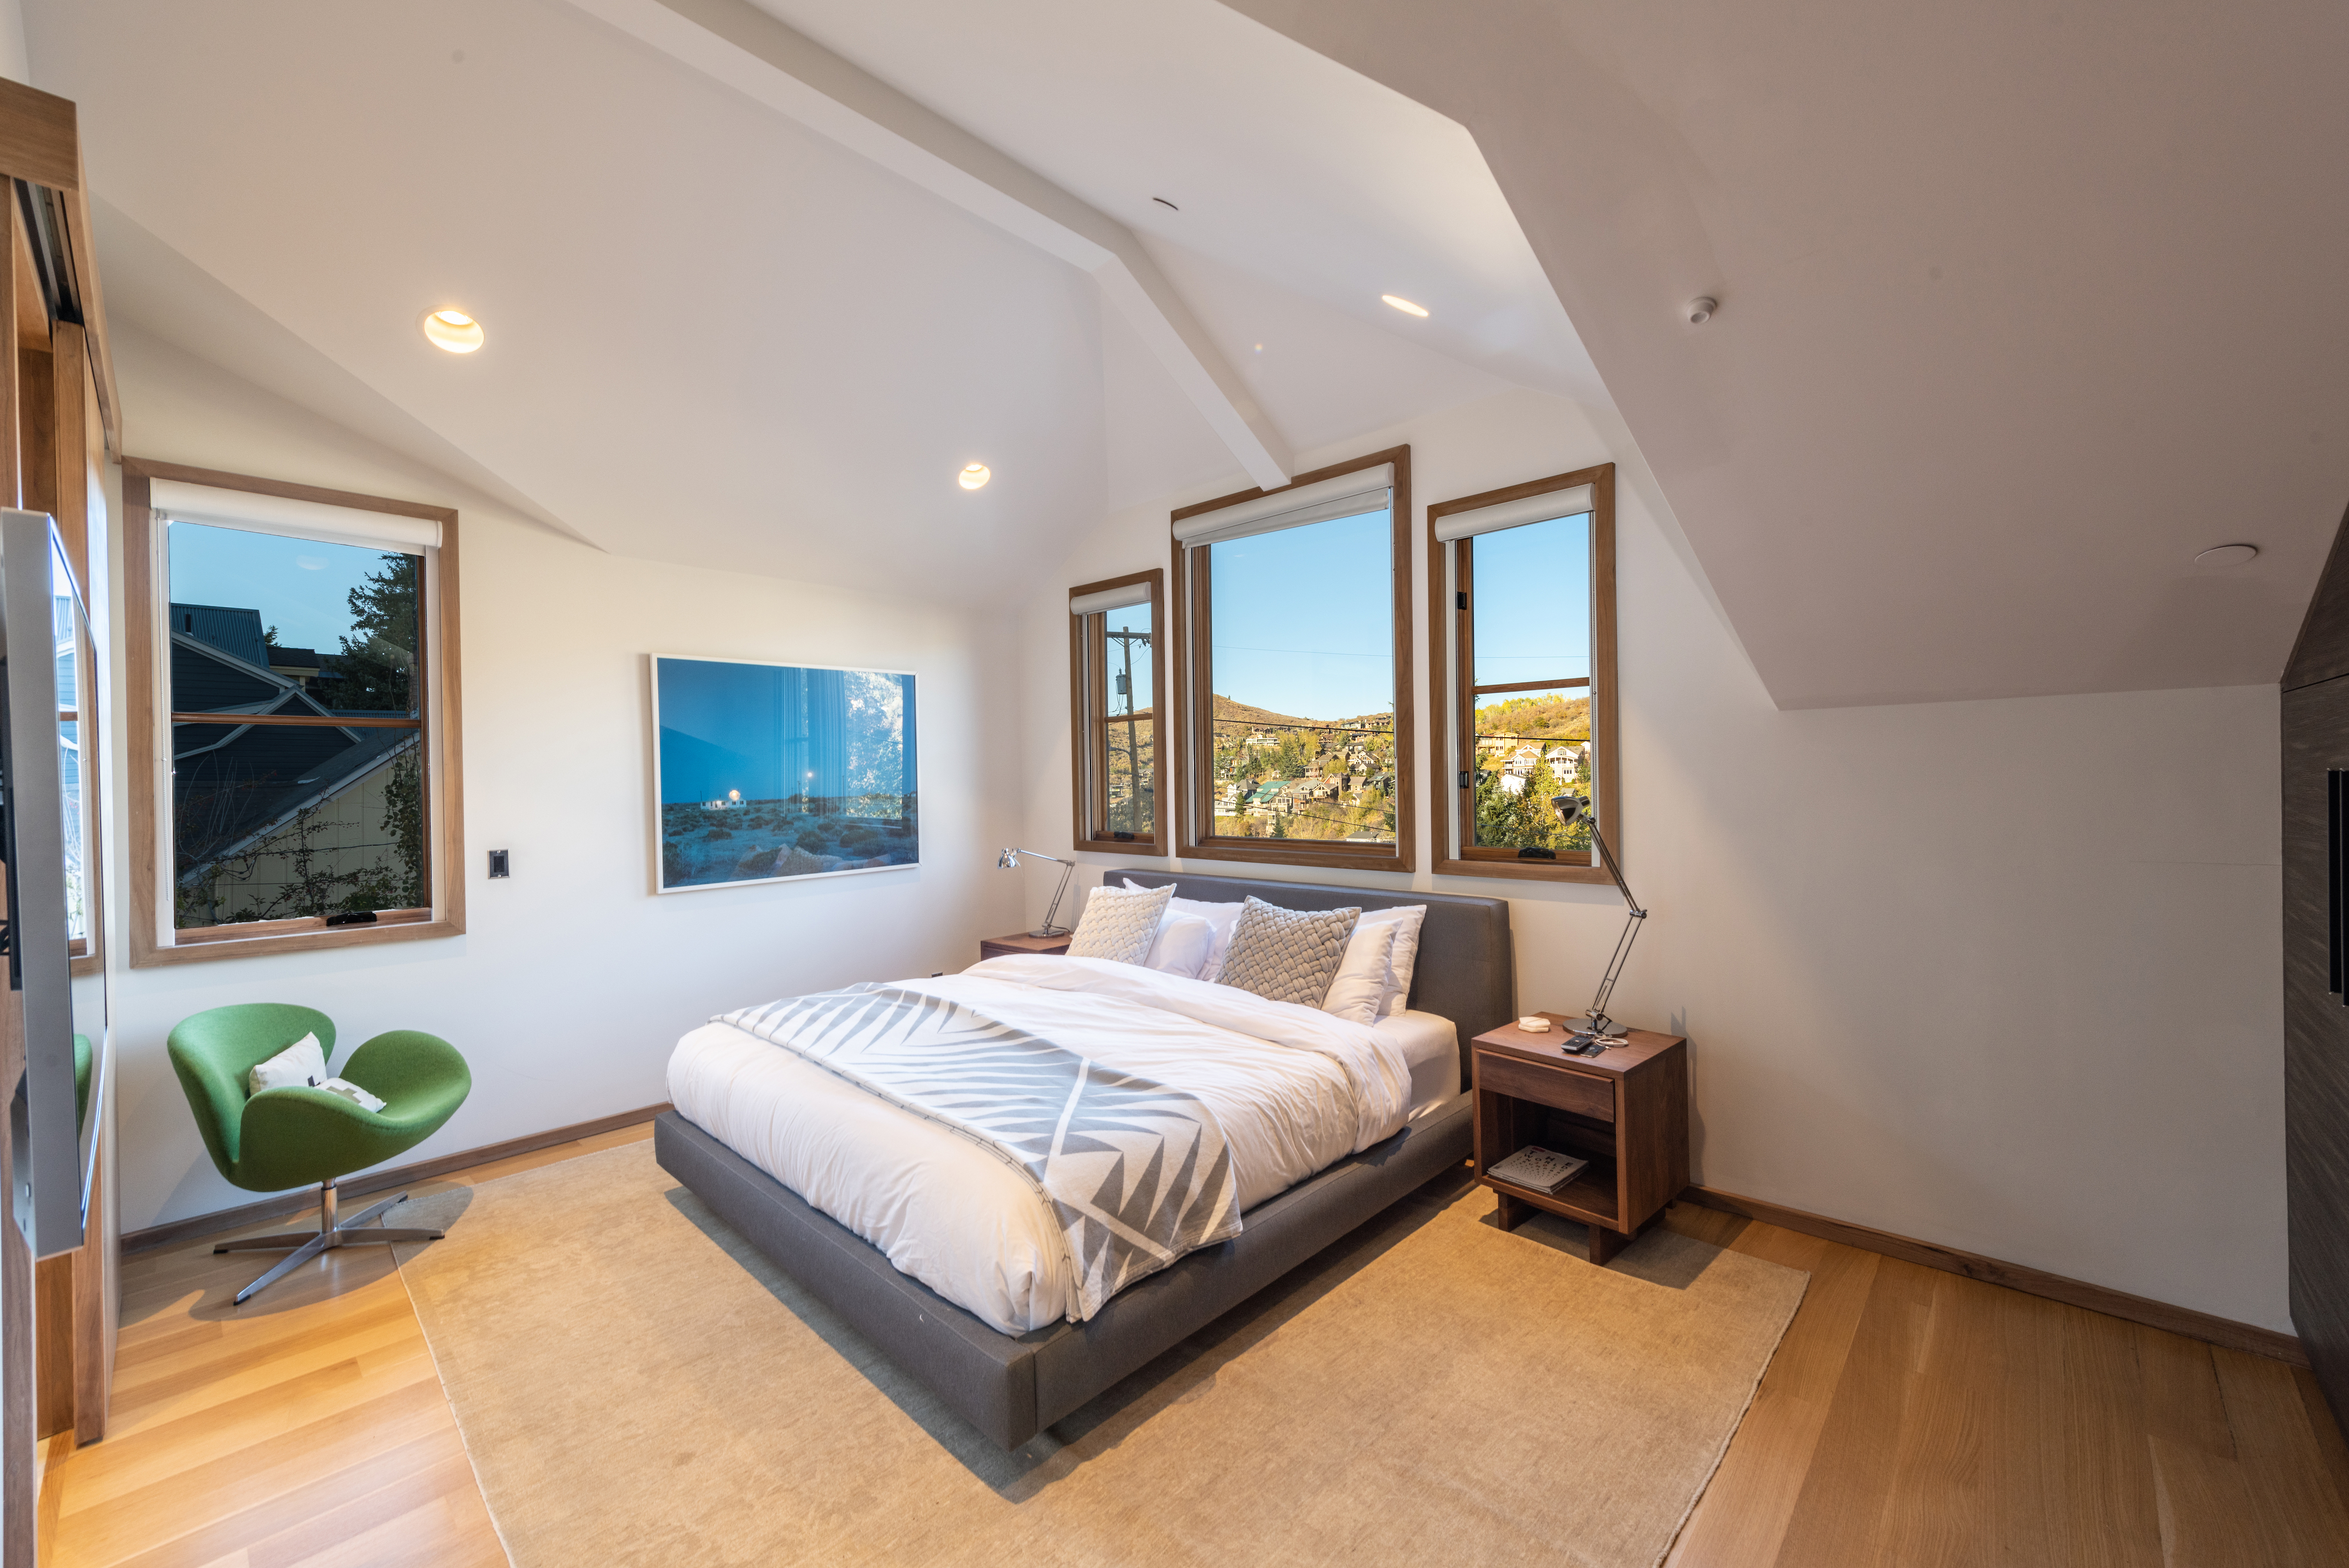 Master bedroom with king, views of Historic Main Street